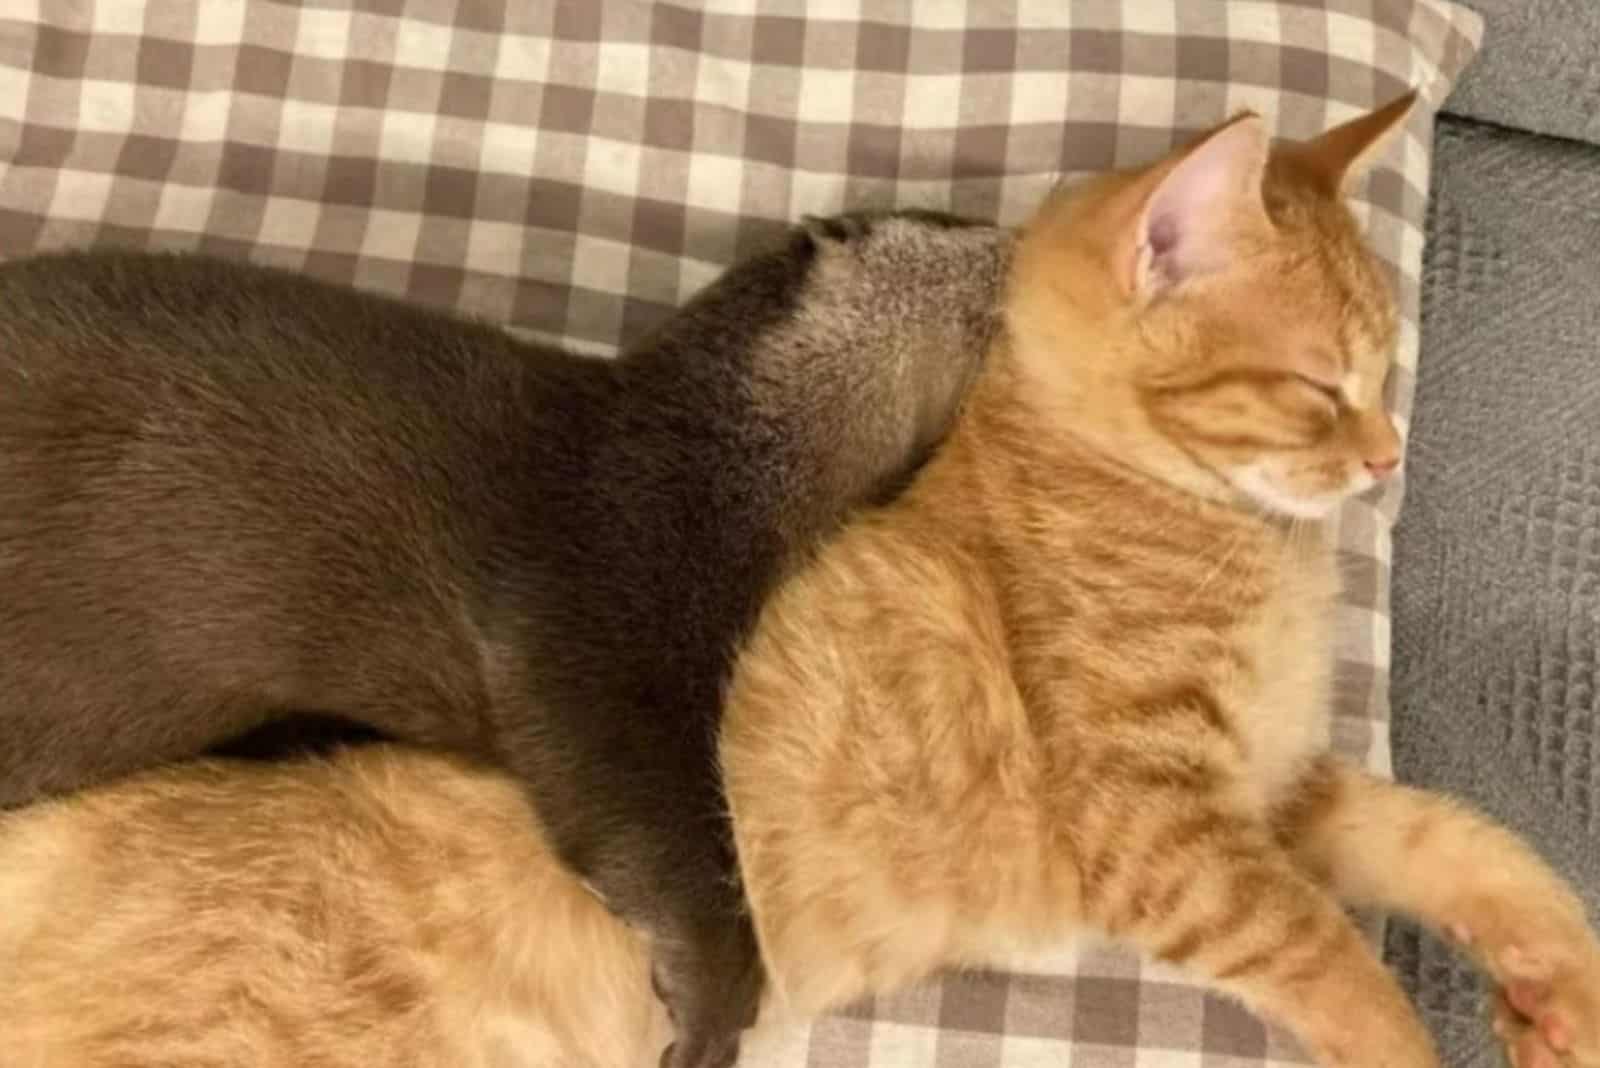 the otter sleeps in the cat's arms